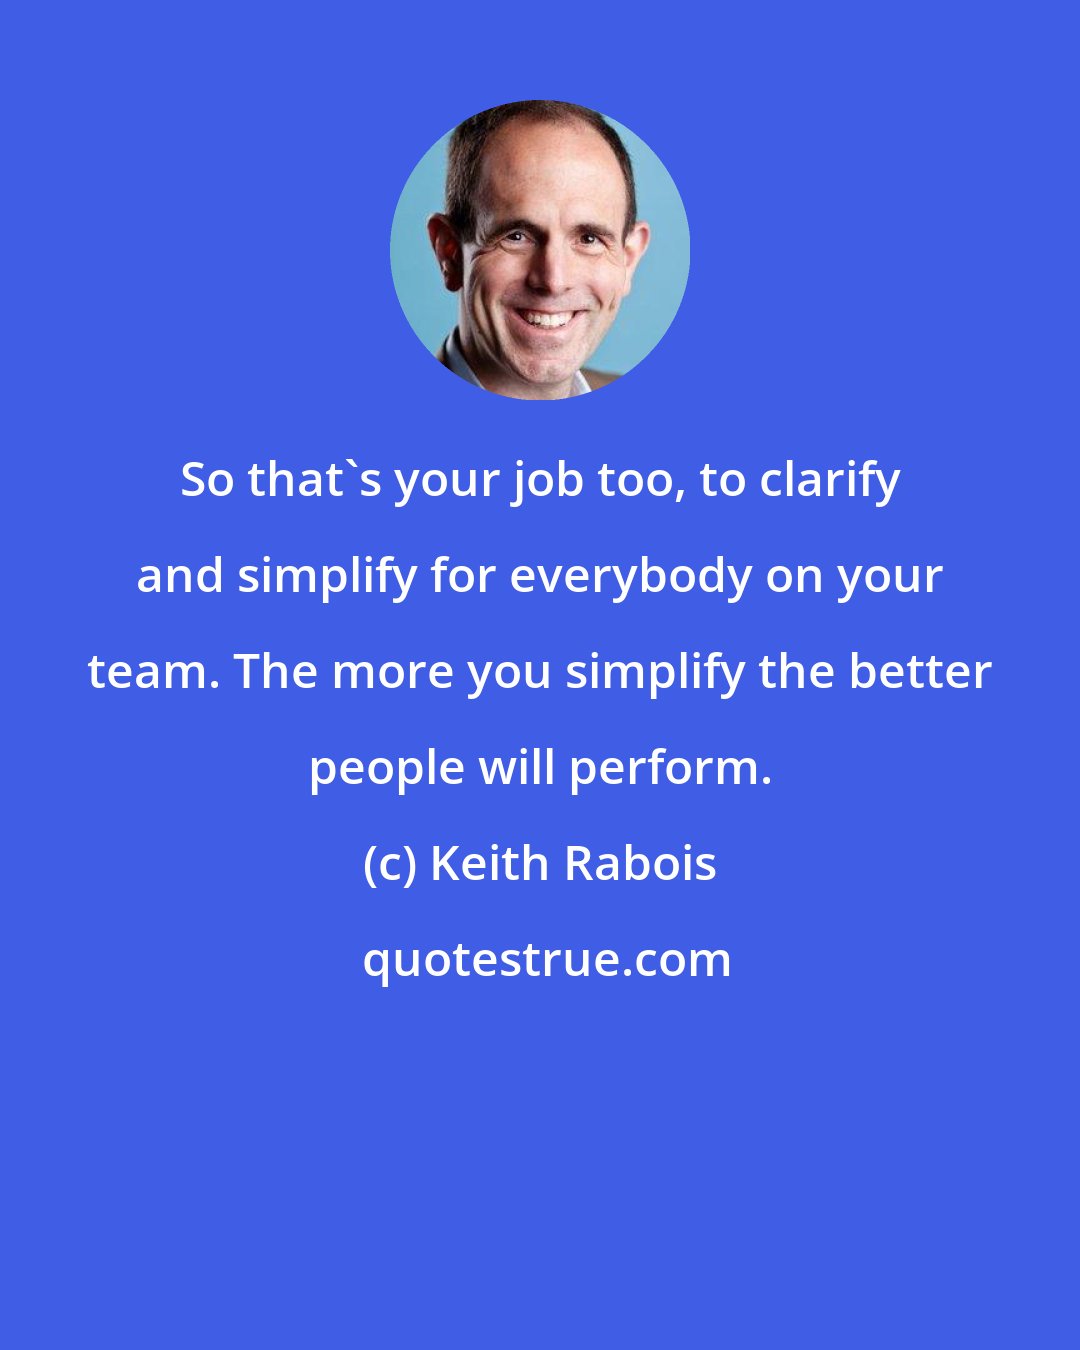 Keith Rabois: So that's your job too, to clarify and simplify for everybody on your team. The more you simplify the better people will perform.